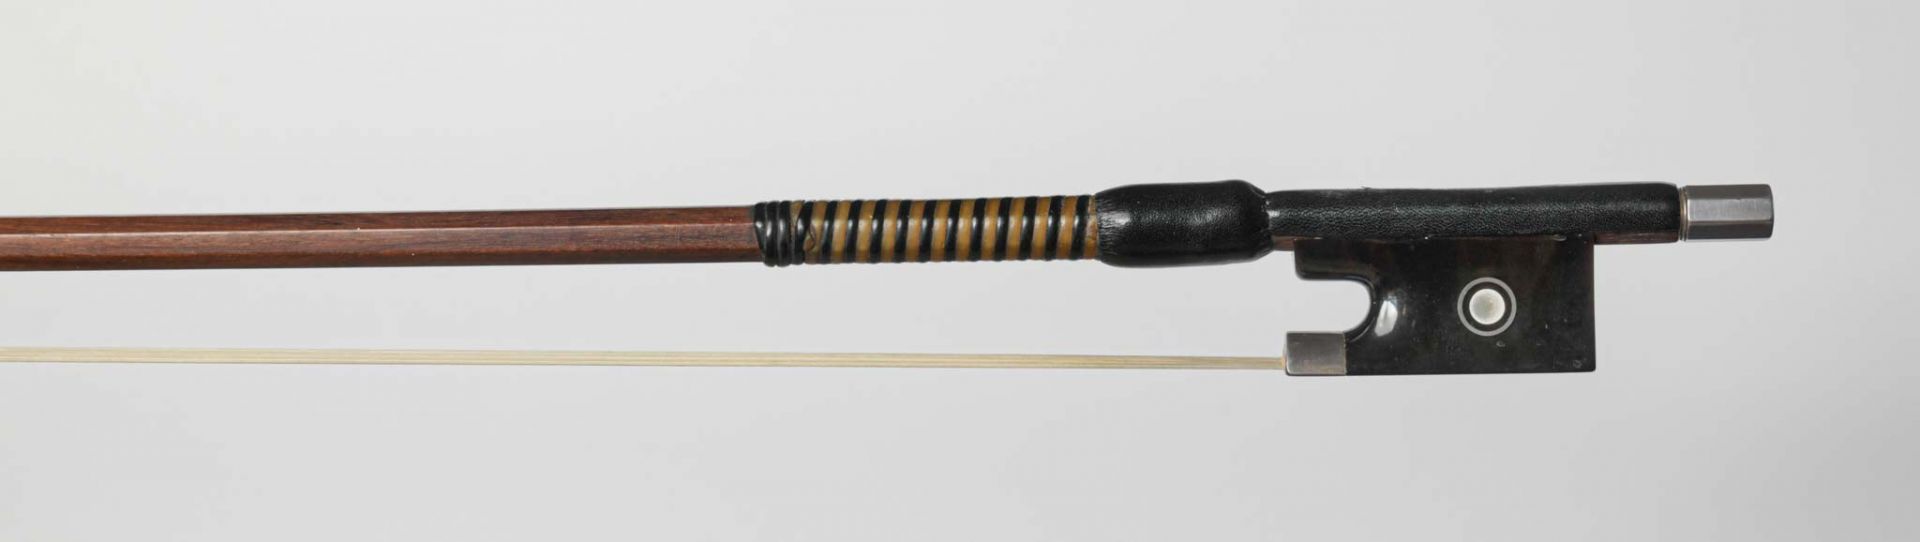 W. E. Hill & Sons violin bow by Yeoman